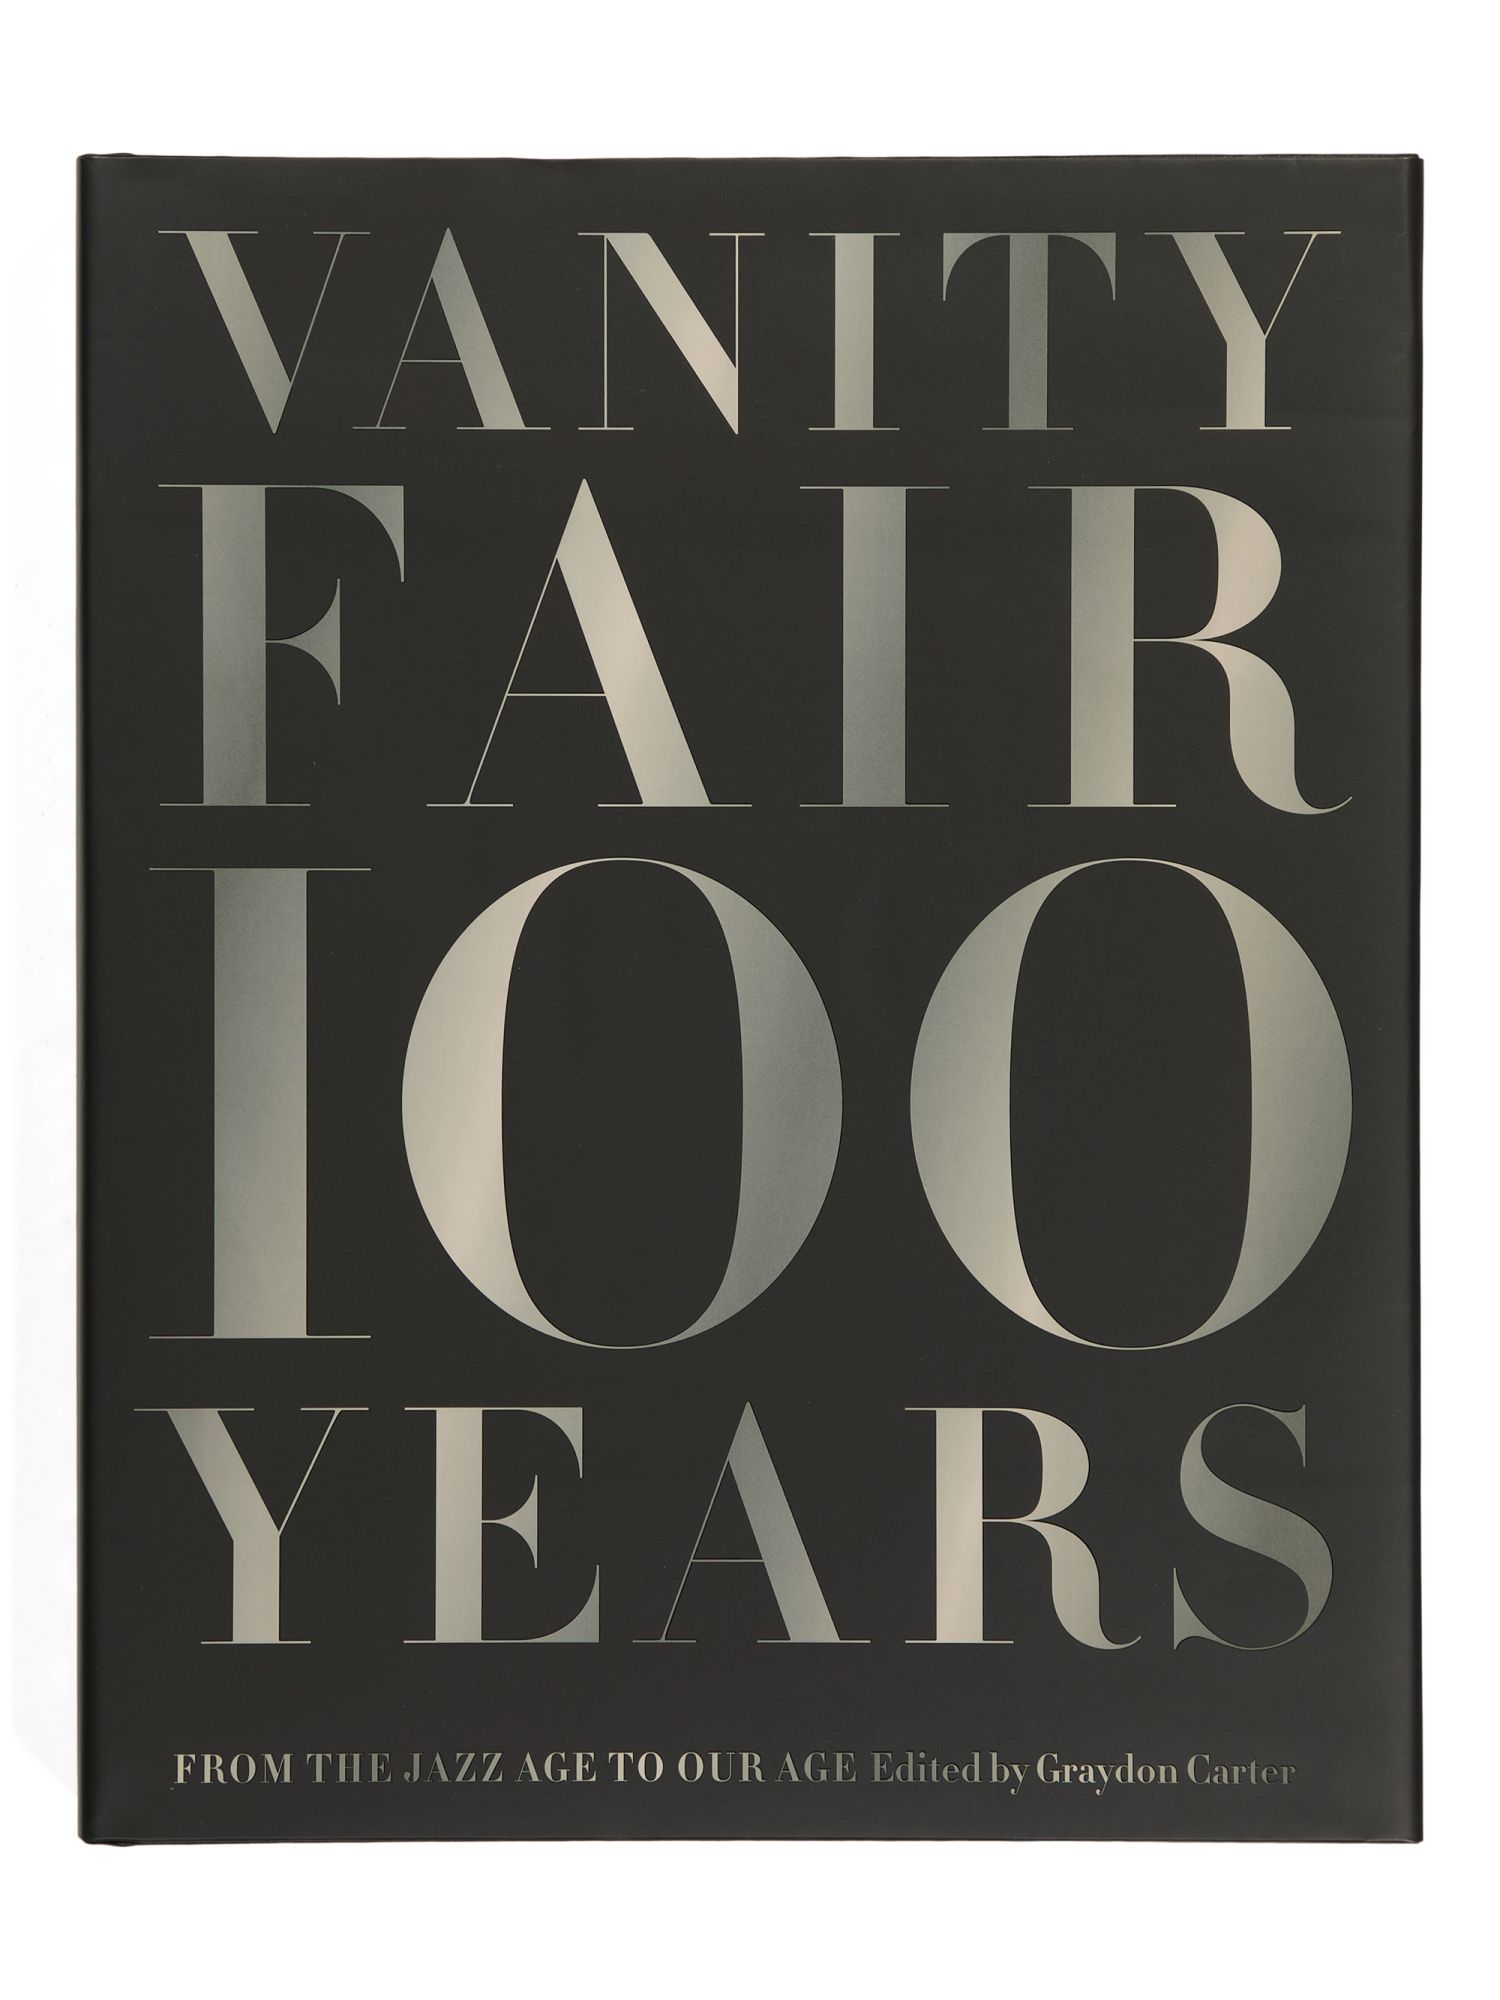 Vanity Fair 100 Years From The Jazz Age To Our Age | Home | Marshalls | Marshalls